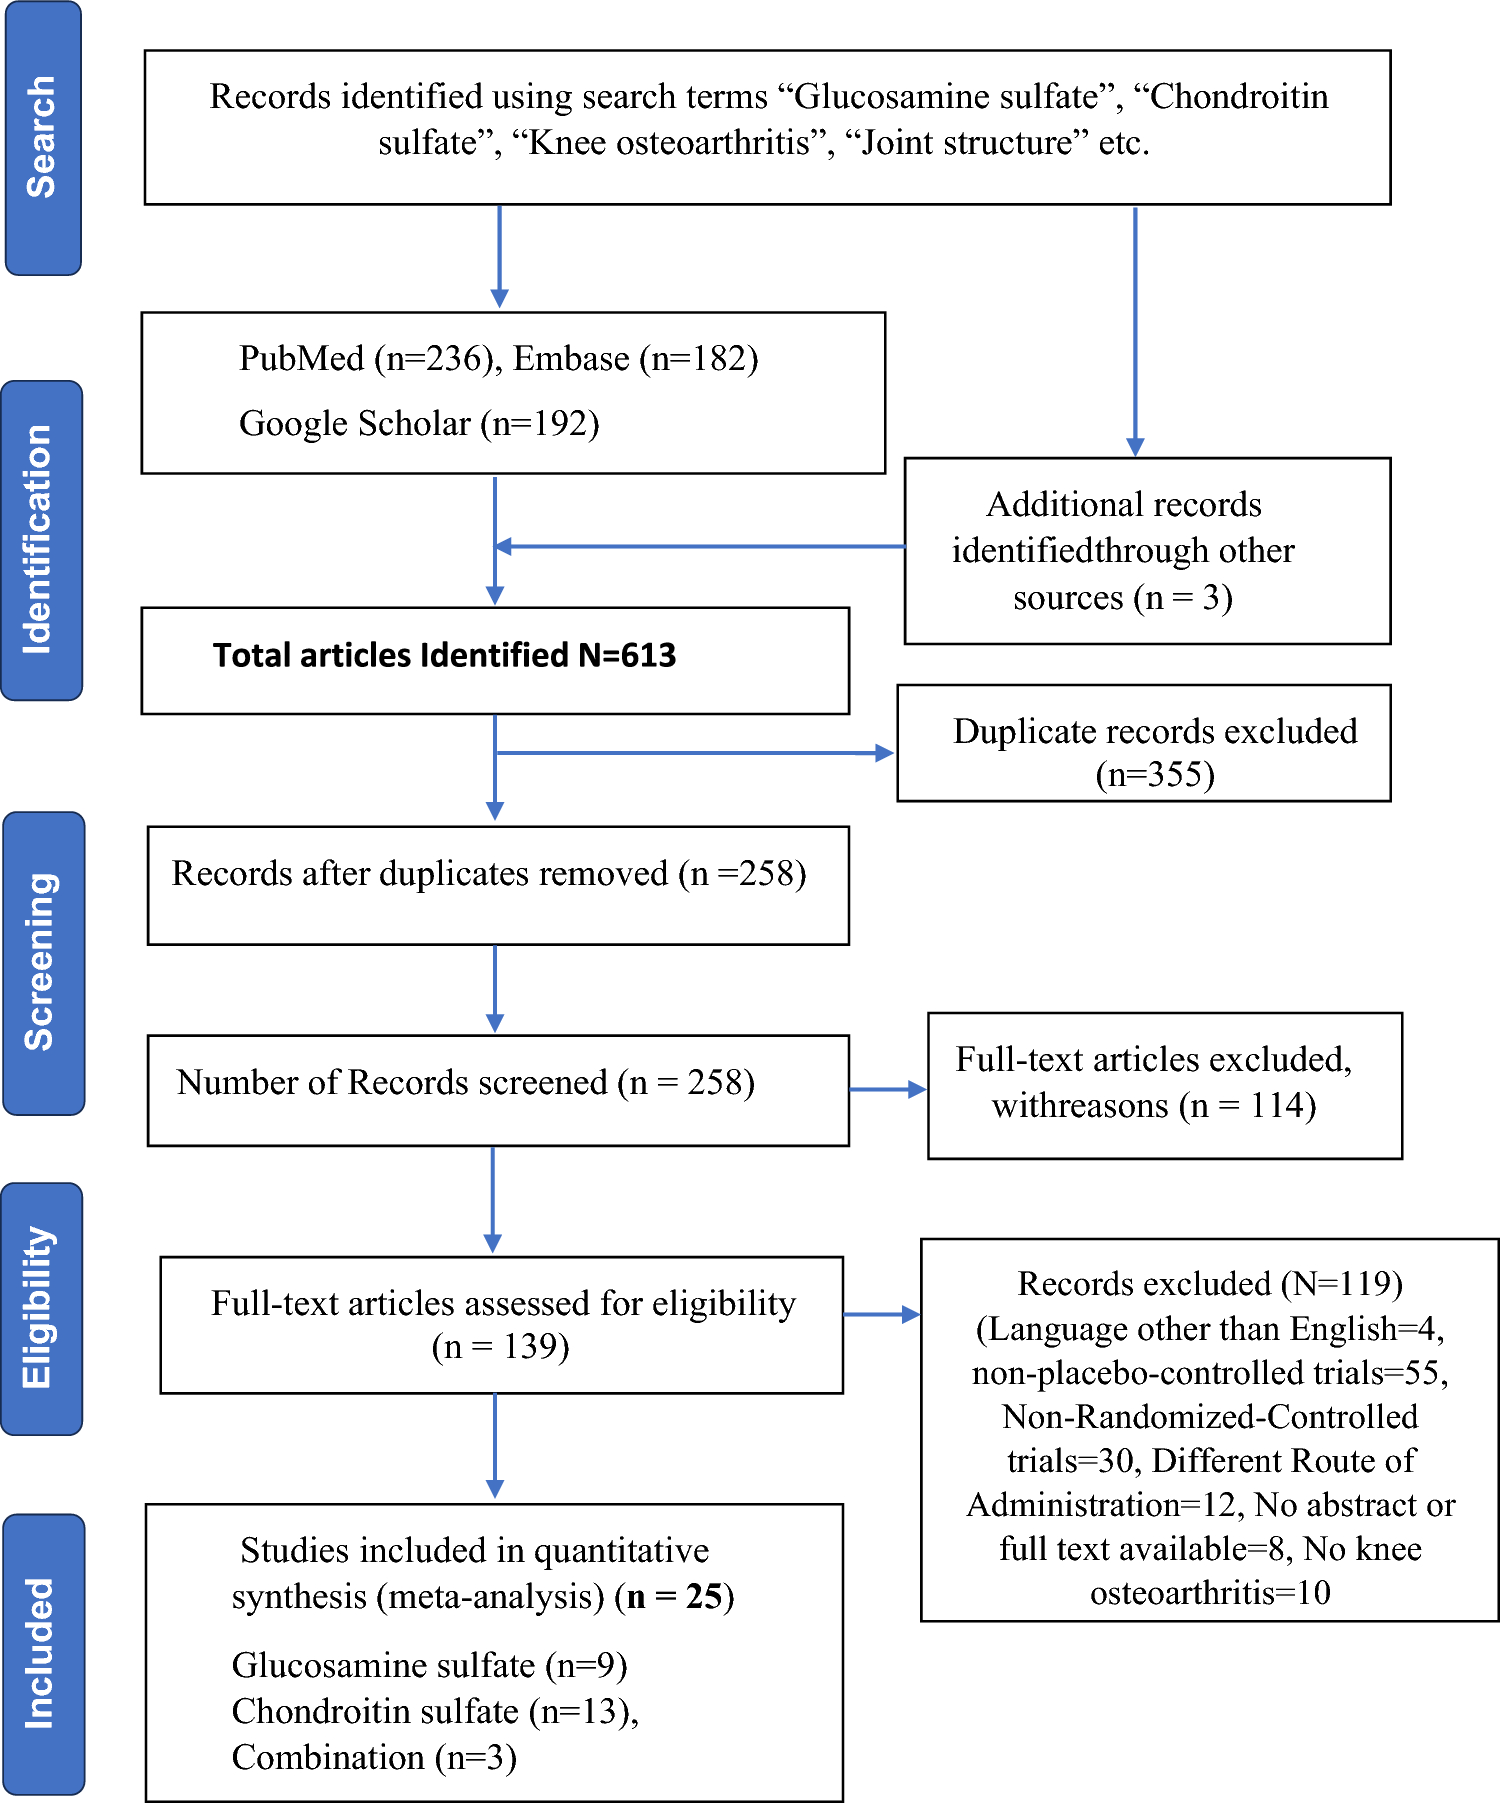 Evaluation of efficacy and safety of glucosamine sulfate, chondroitin sulfate, and their combination regimen in the management of knee osteoarthritis: a systematic review and meta-analysis